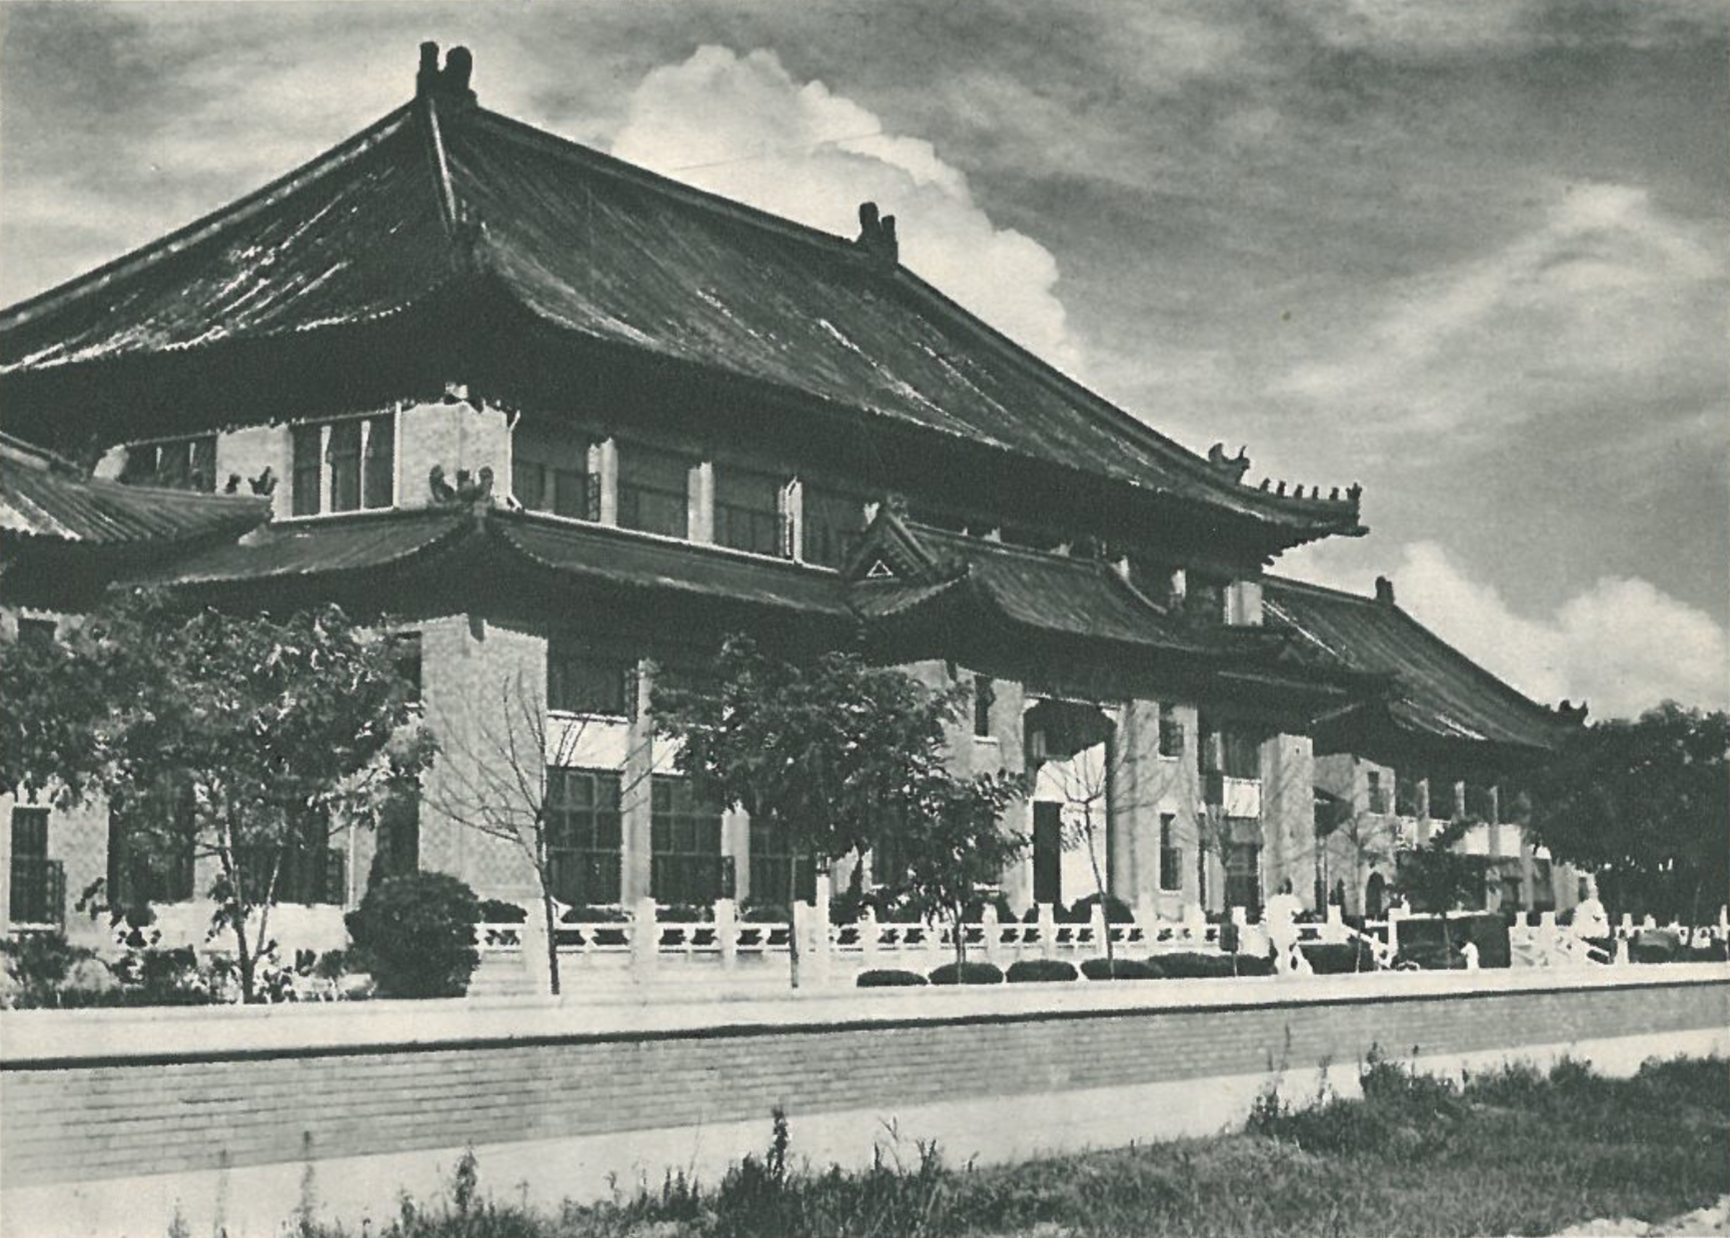 Fig.1: ‘The Railway Administration Building’ 鐵道部, from K.W. Kwok 郭錫麒, The Splendours of Historic Nanking 南京景集, Shanghai: Kelly & Walsh, 1933: plate no.63.